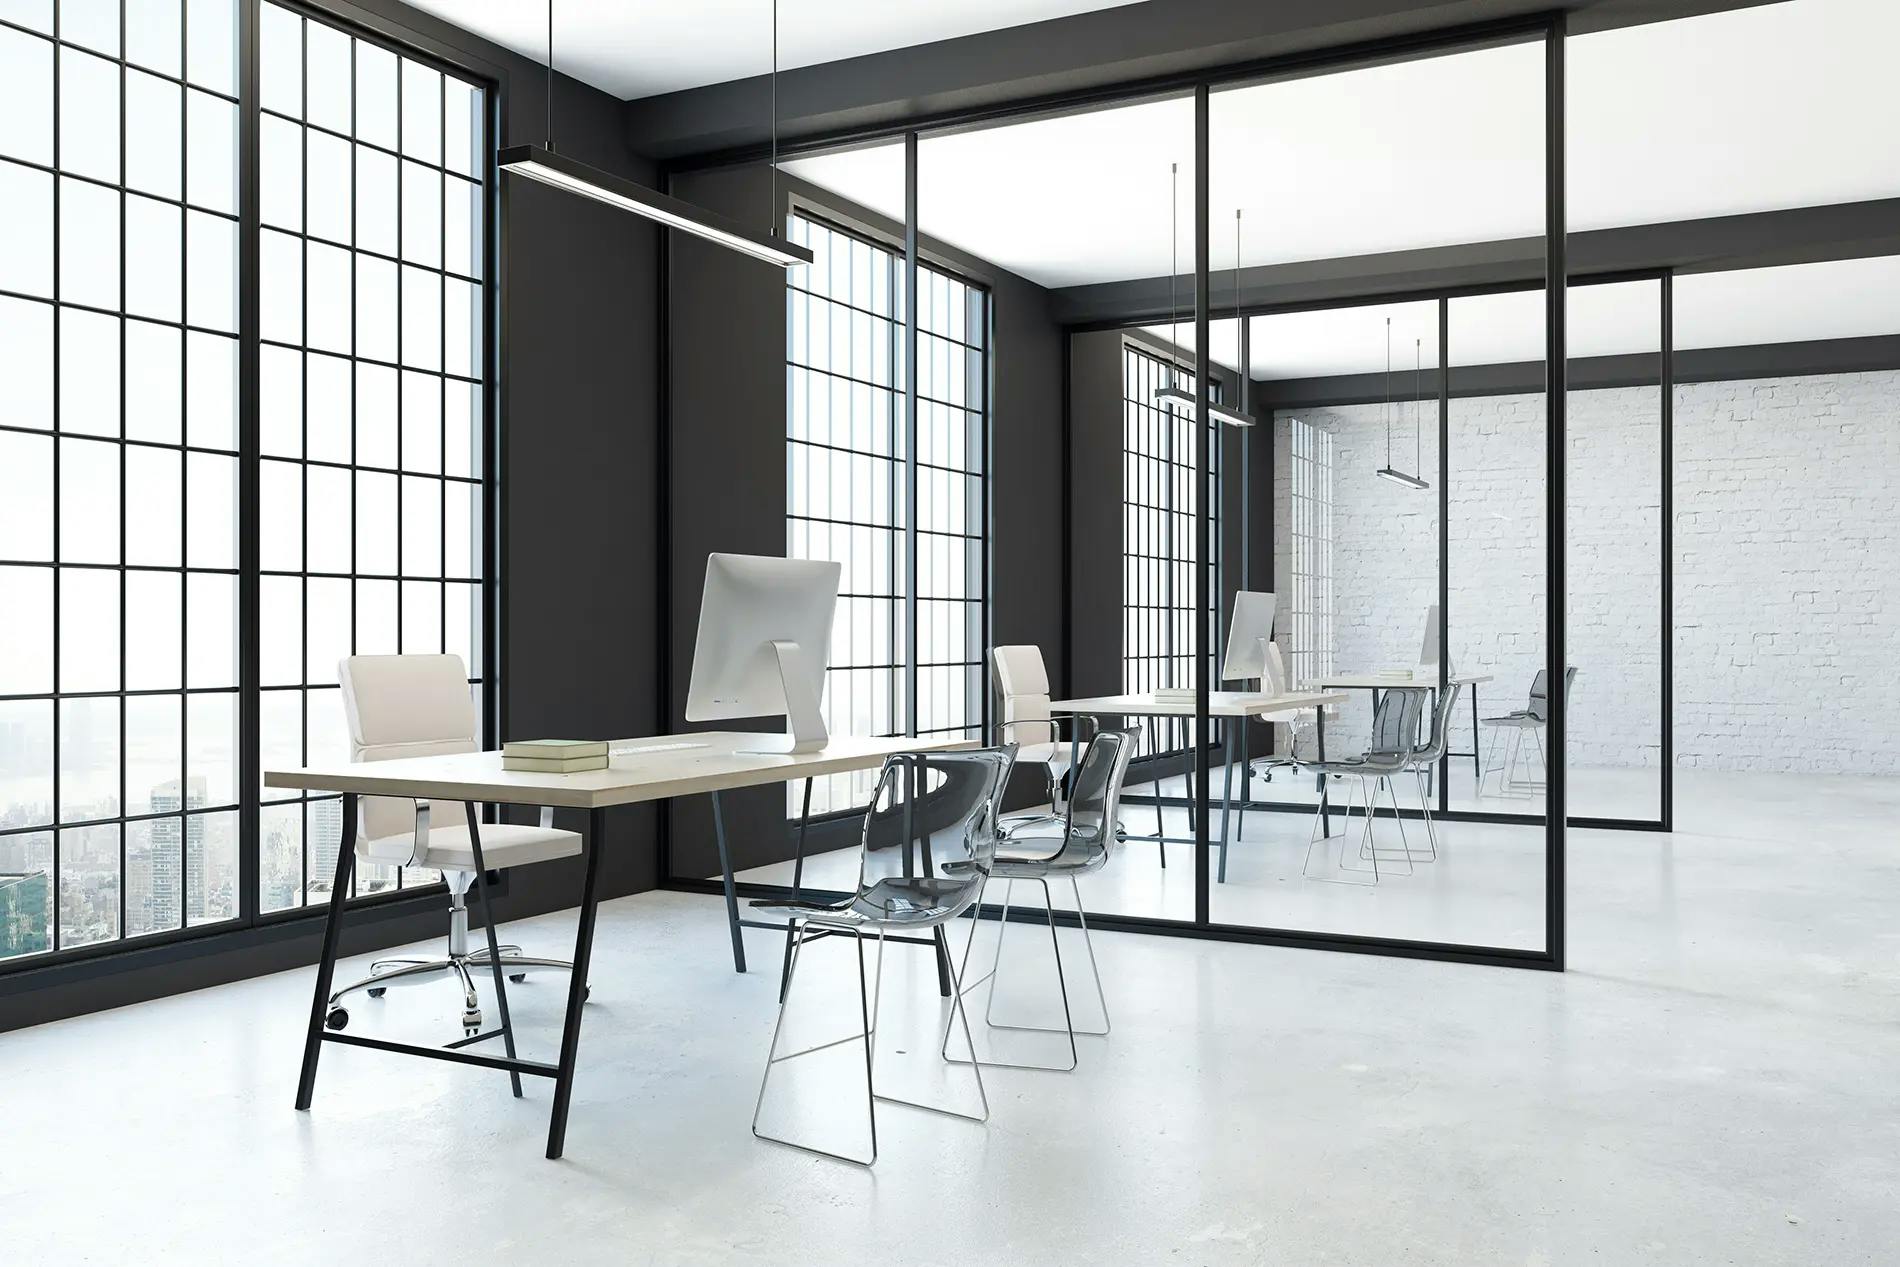 Modern Office with loft style windows and glass partitions